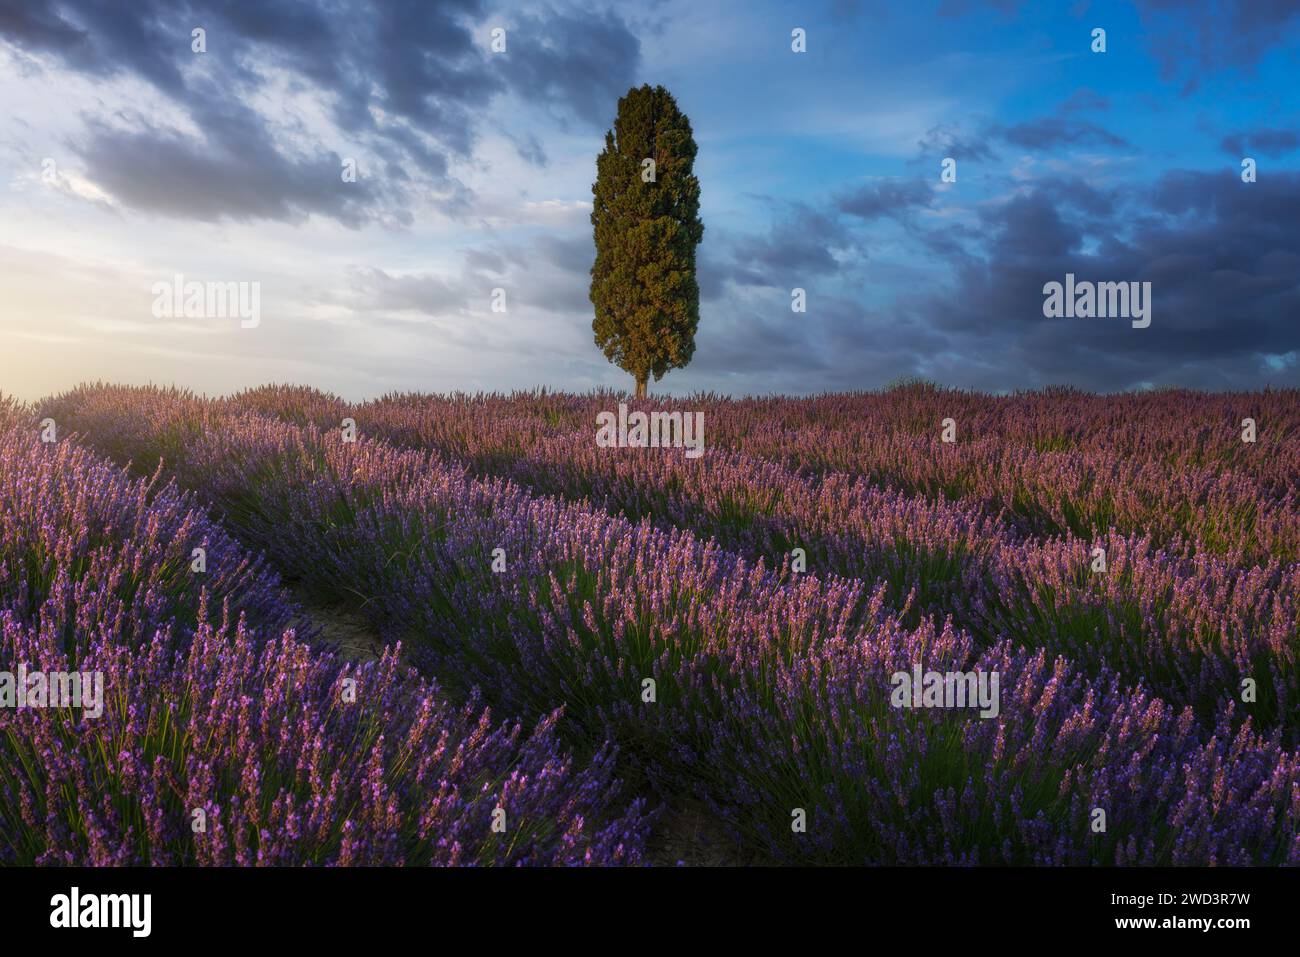 Lavender fields and cypress tree at sunset. Orciano Pisano, Tuscany, Pisa, Italy. Europe Stock Photo